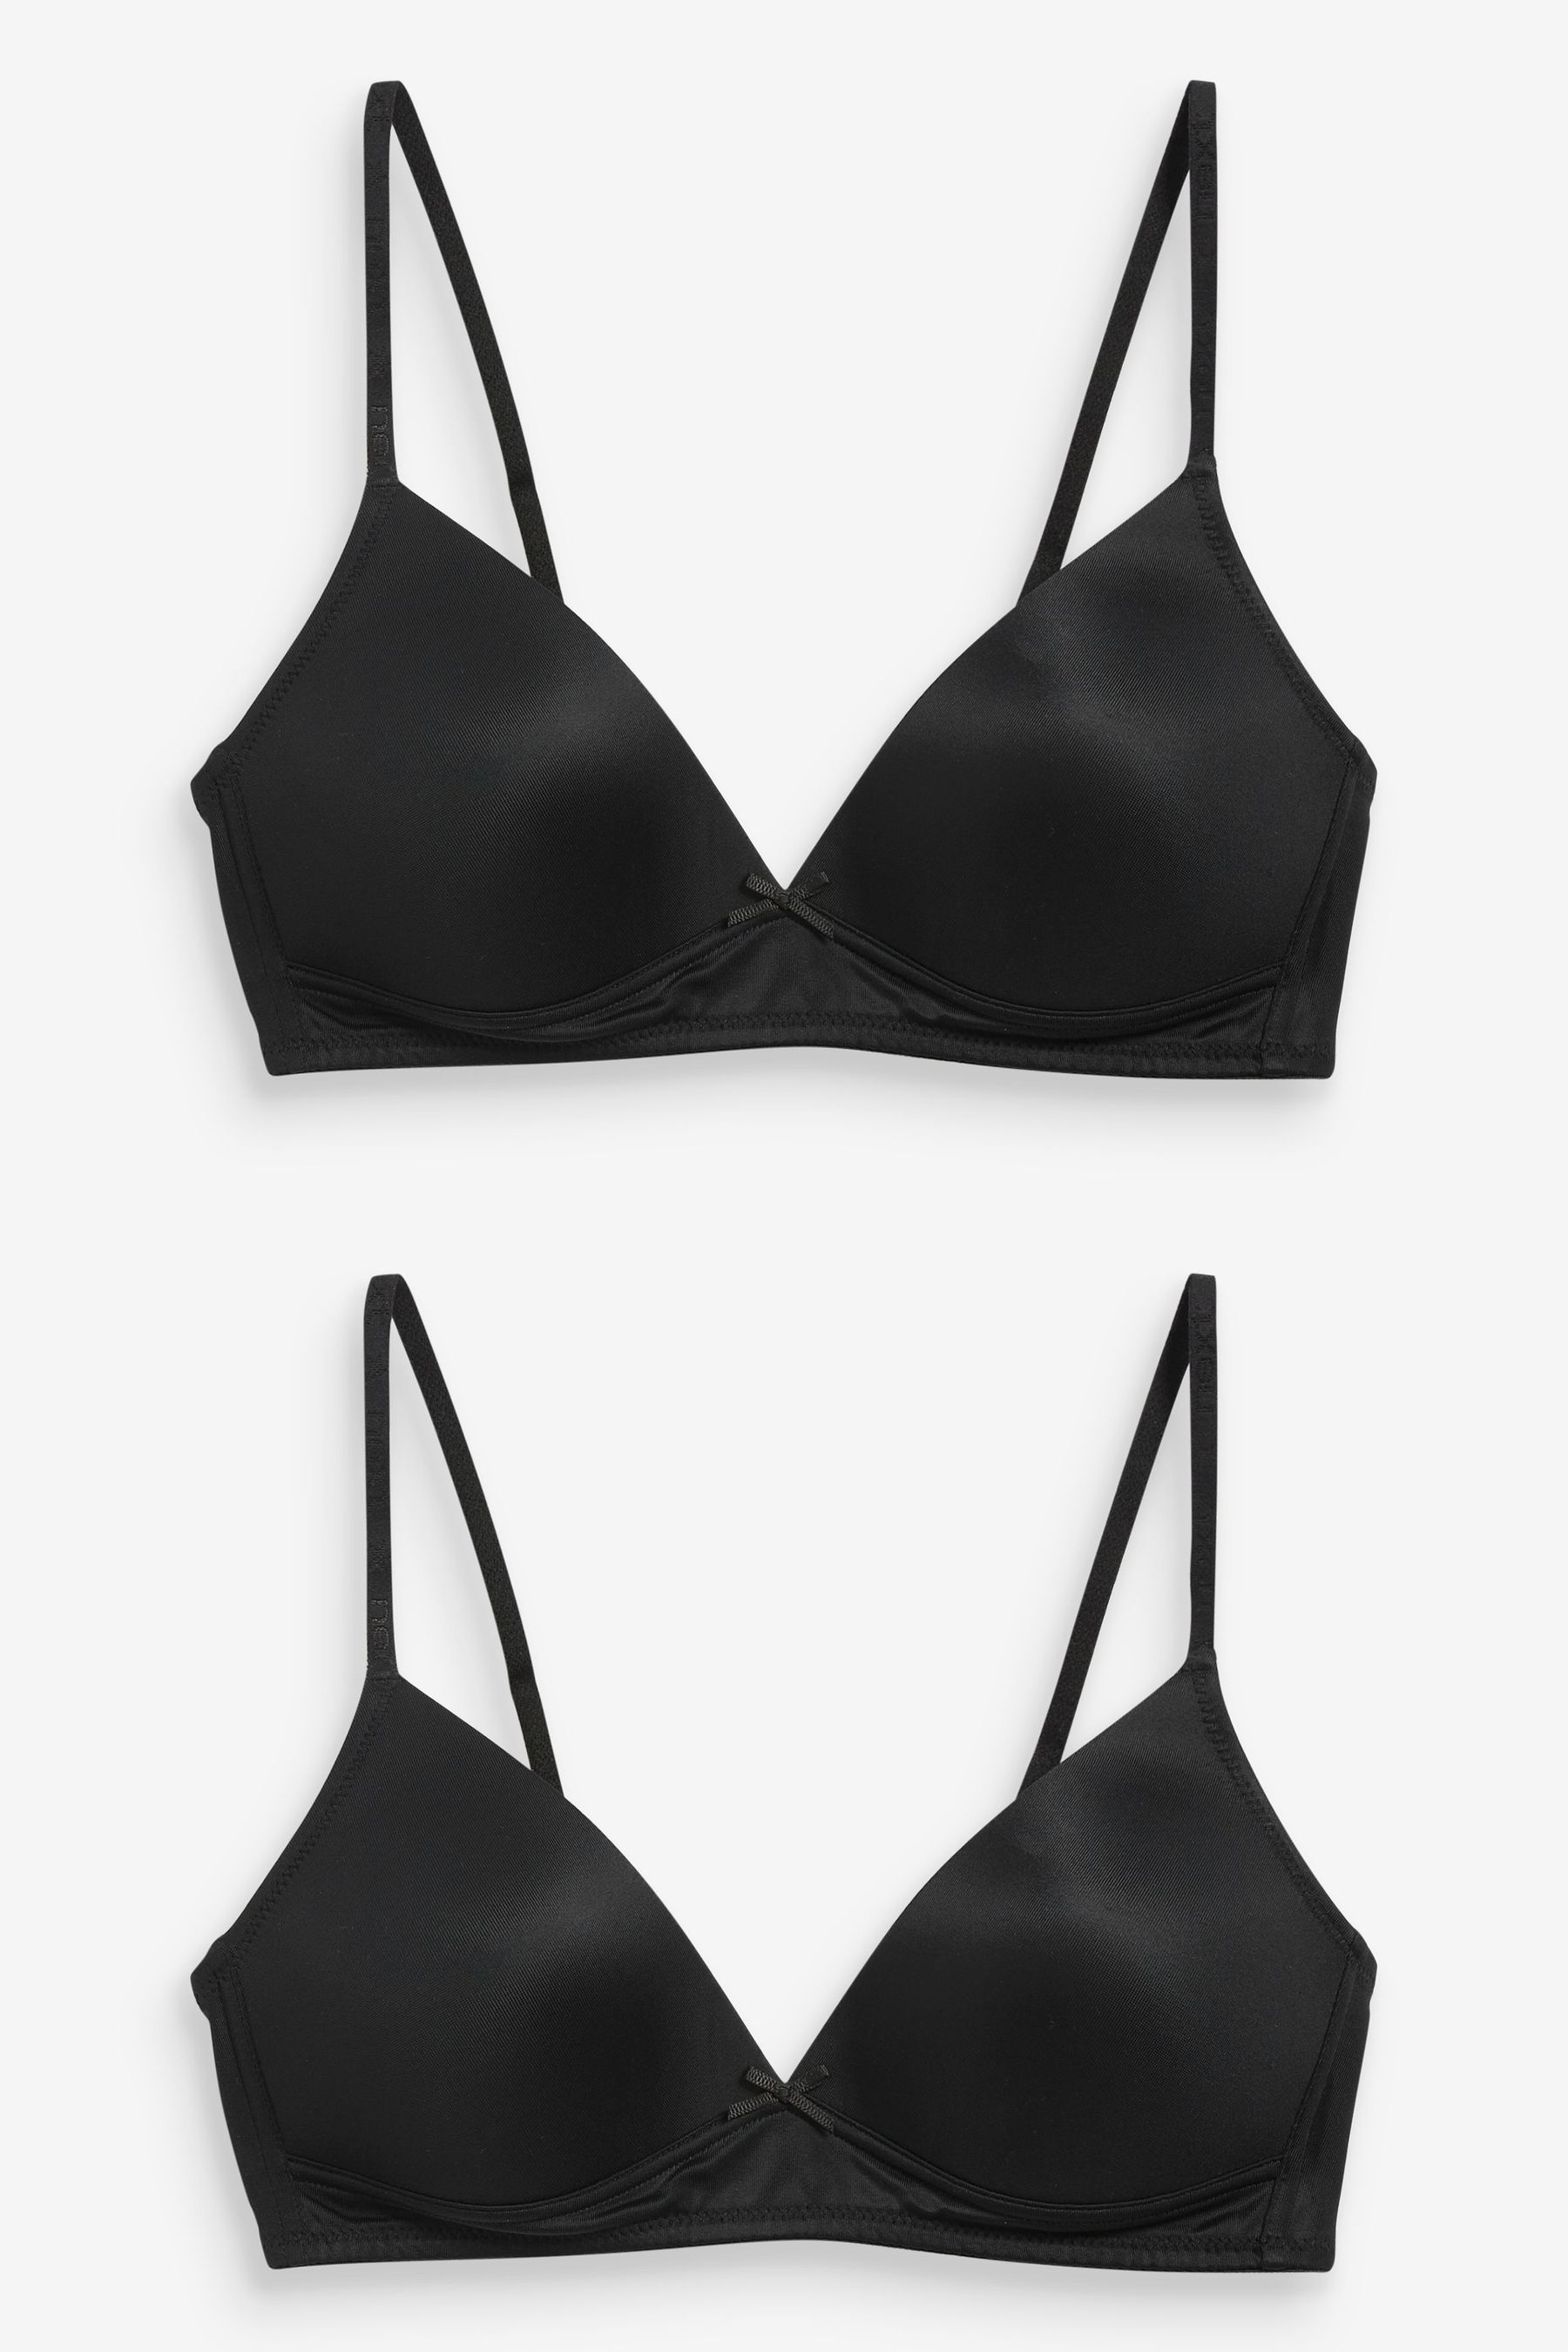 Buy Black Trainer Bras 2 Pack from the Next UK online shop